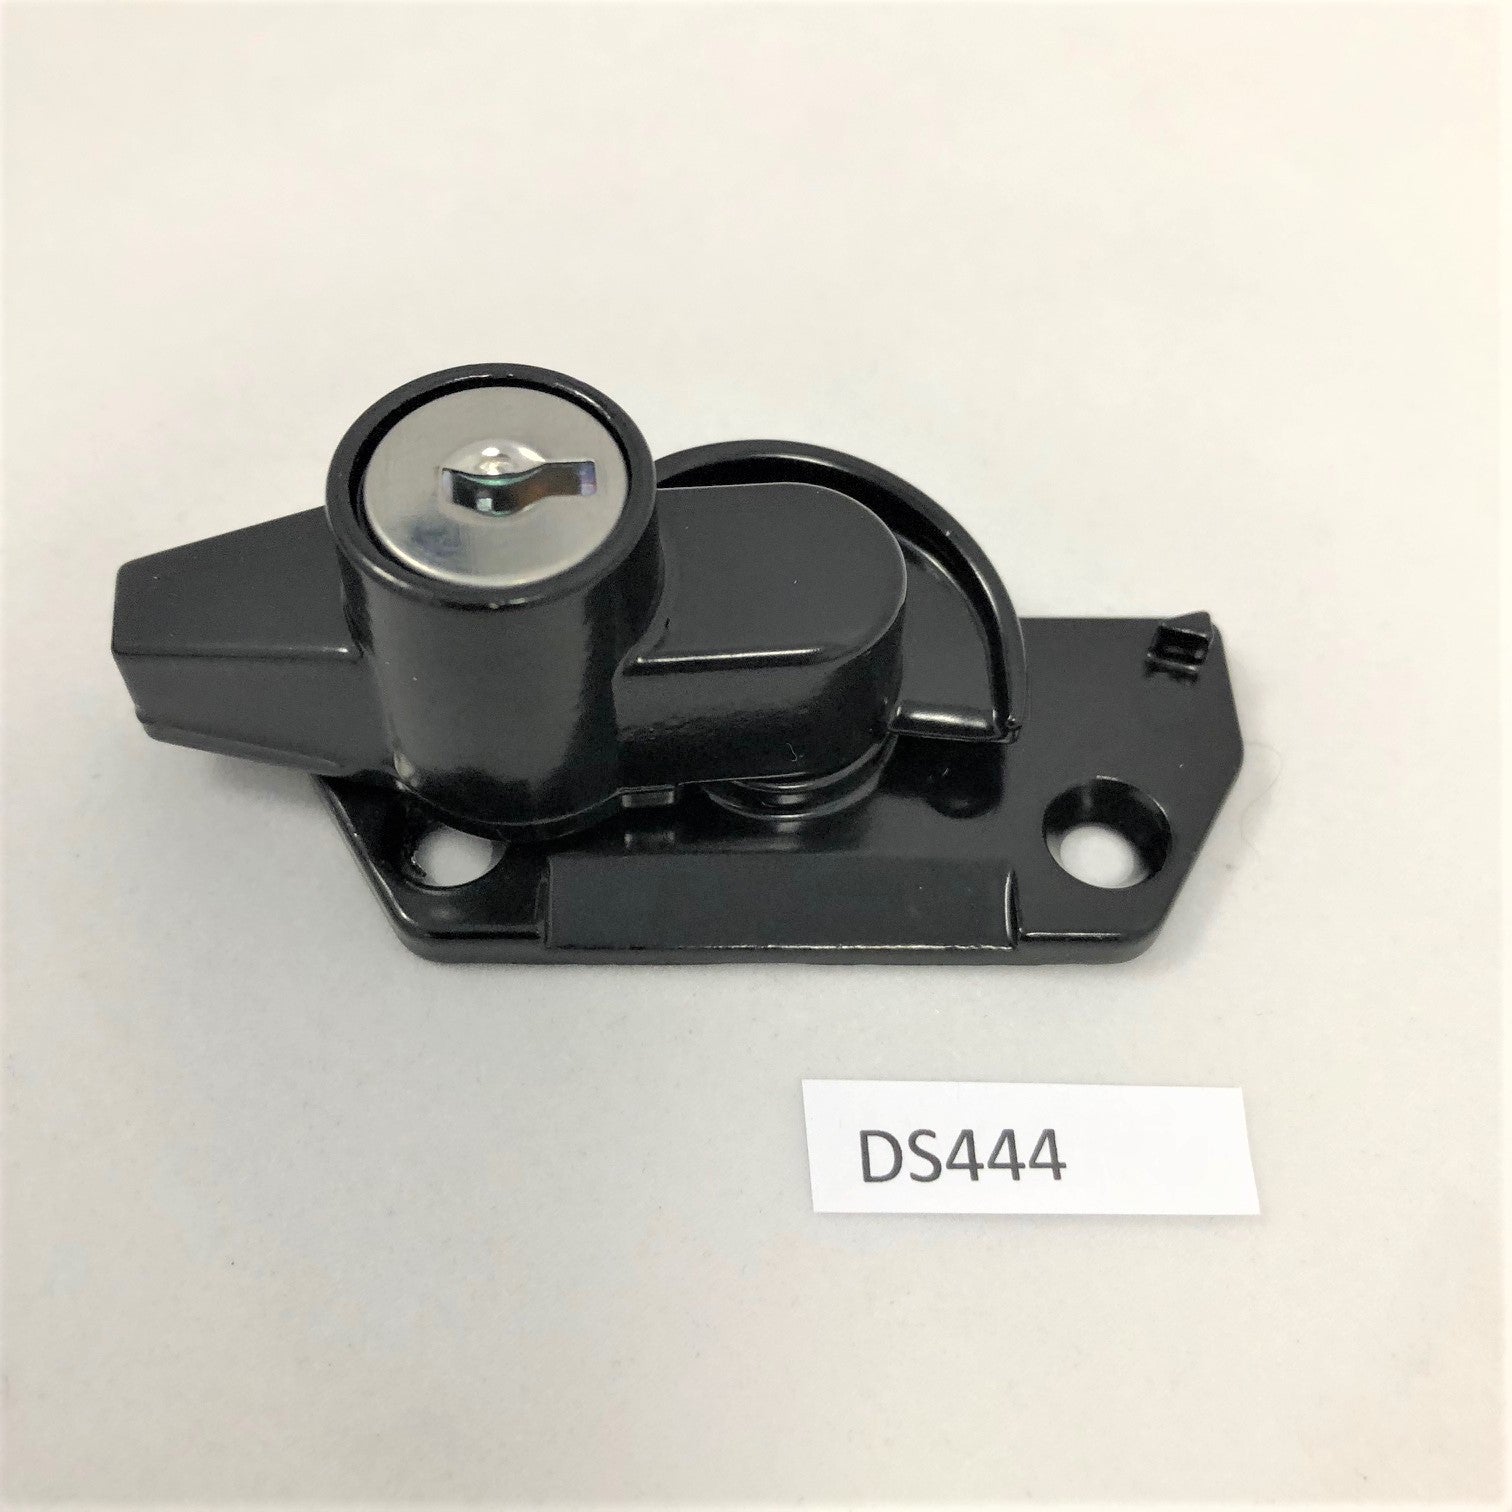 Ds444 Cam Sash Lock - Double Hungs Black